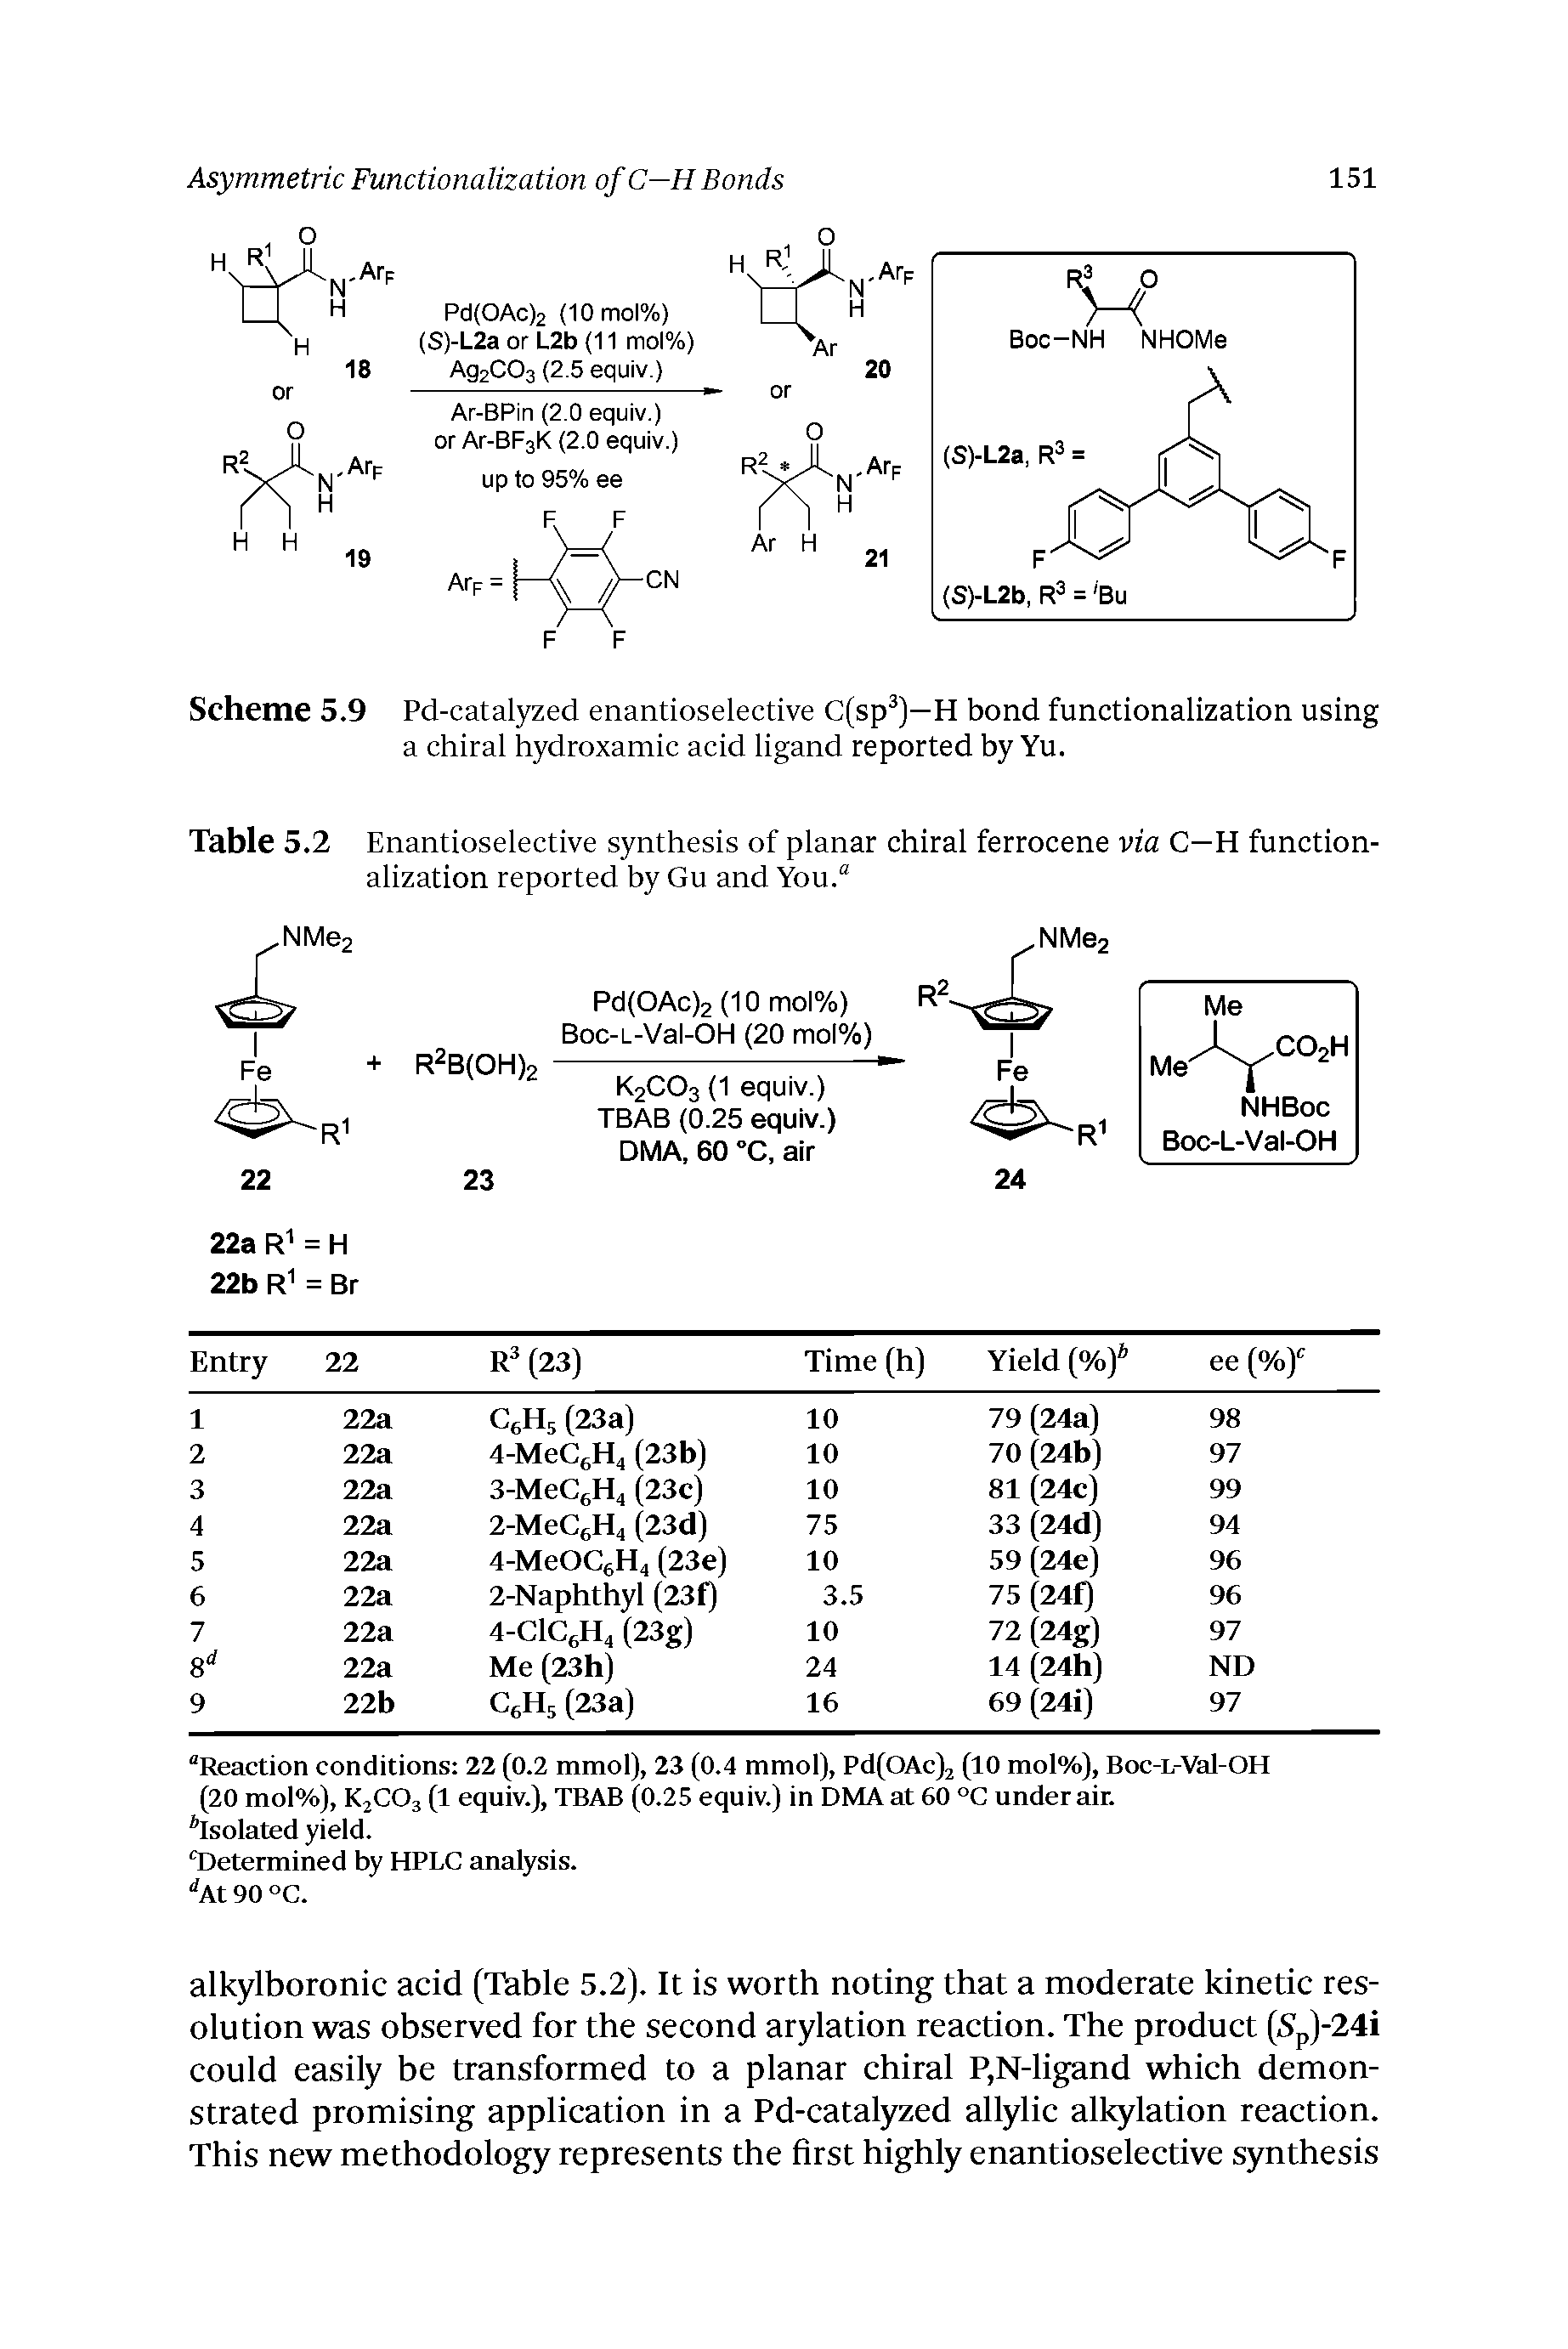 Scheme 5.9 Pd-catalyzed enantioselective C(sp )—H bond functionalization using a chiral hydroxamic acid ligand reported by Yu.